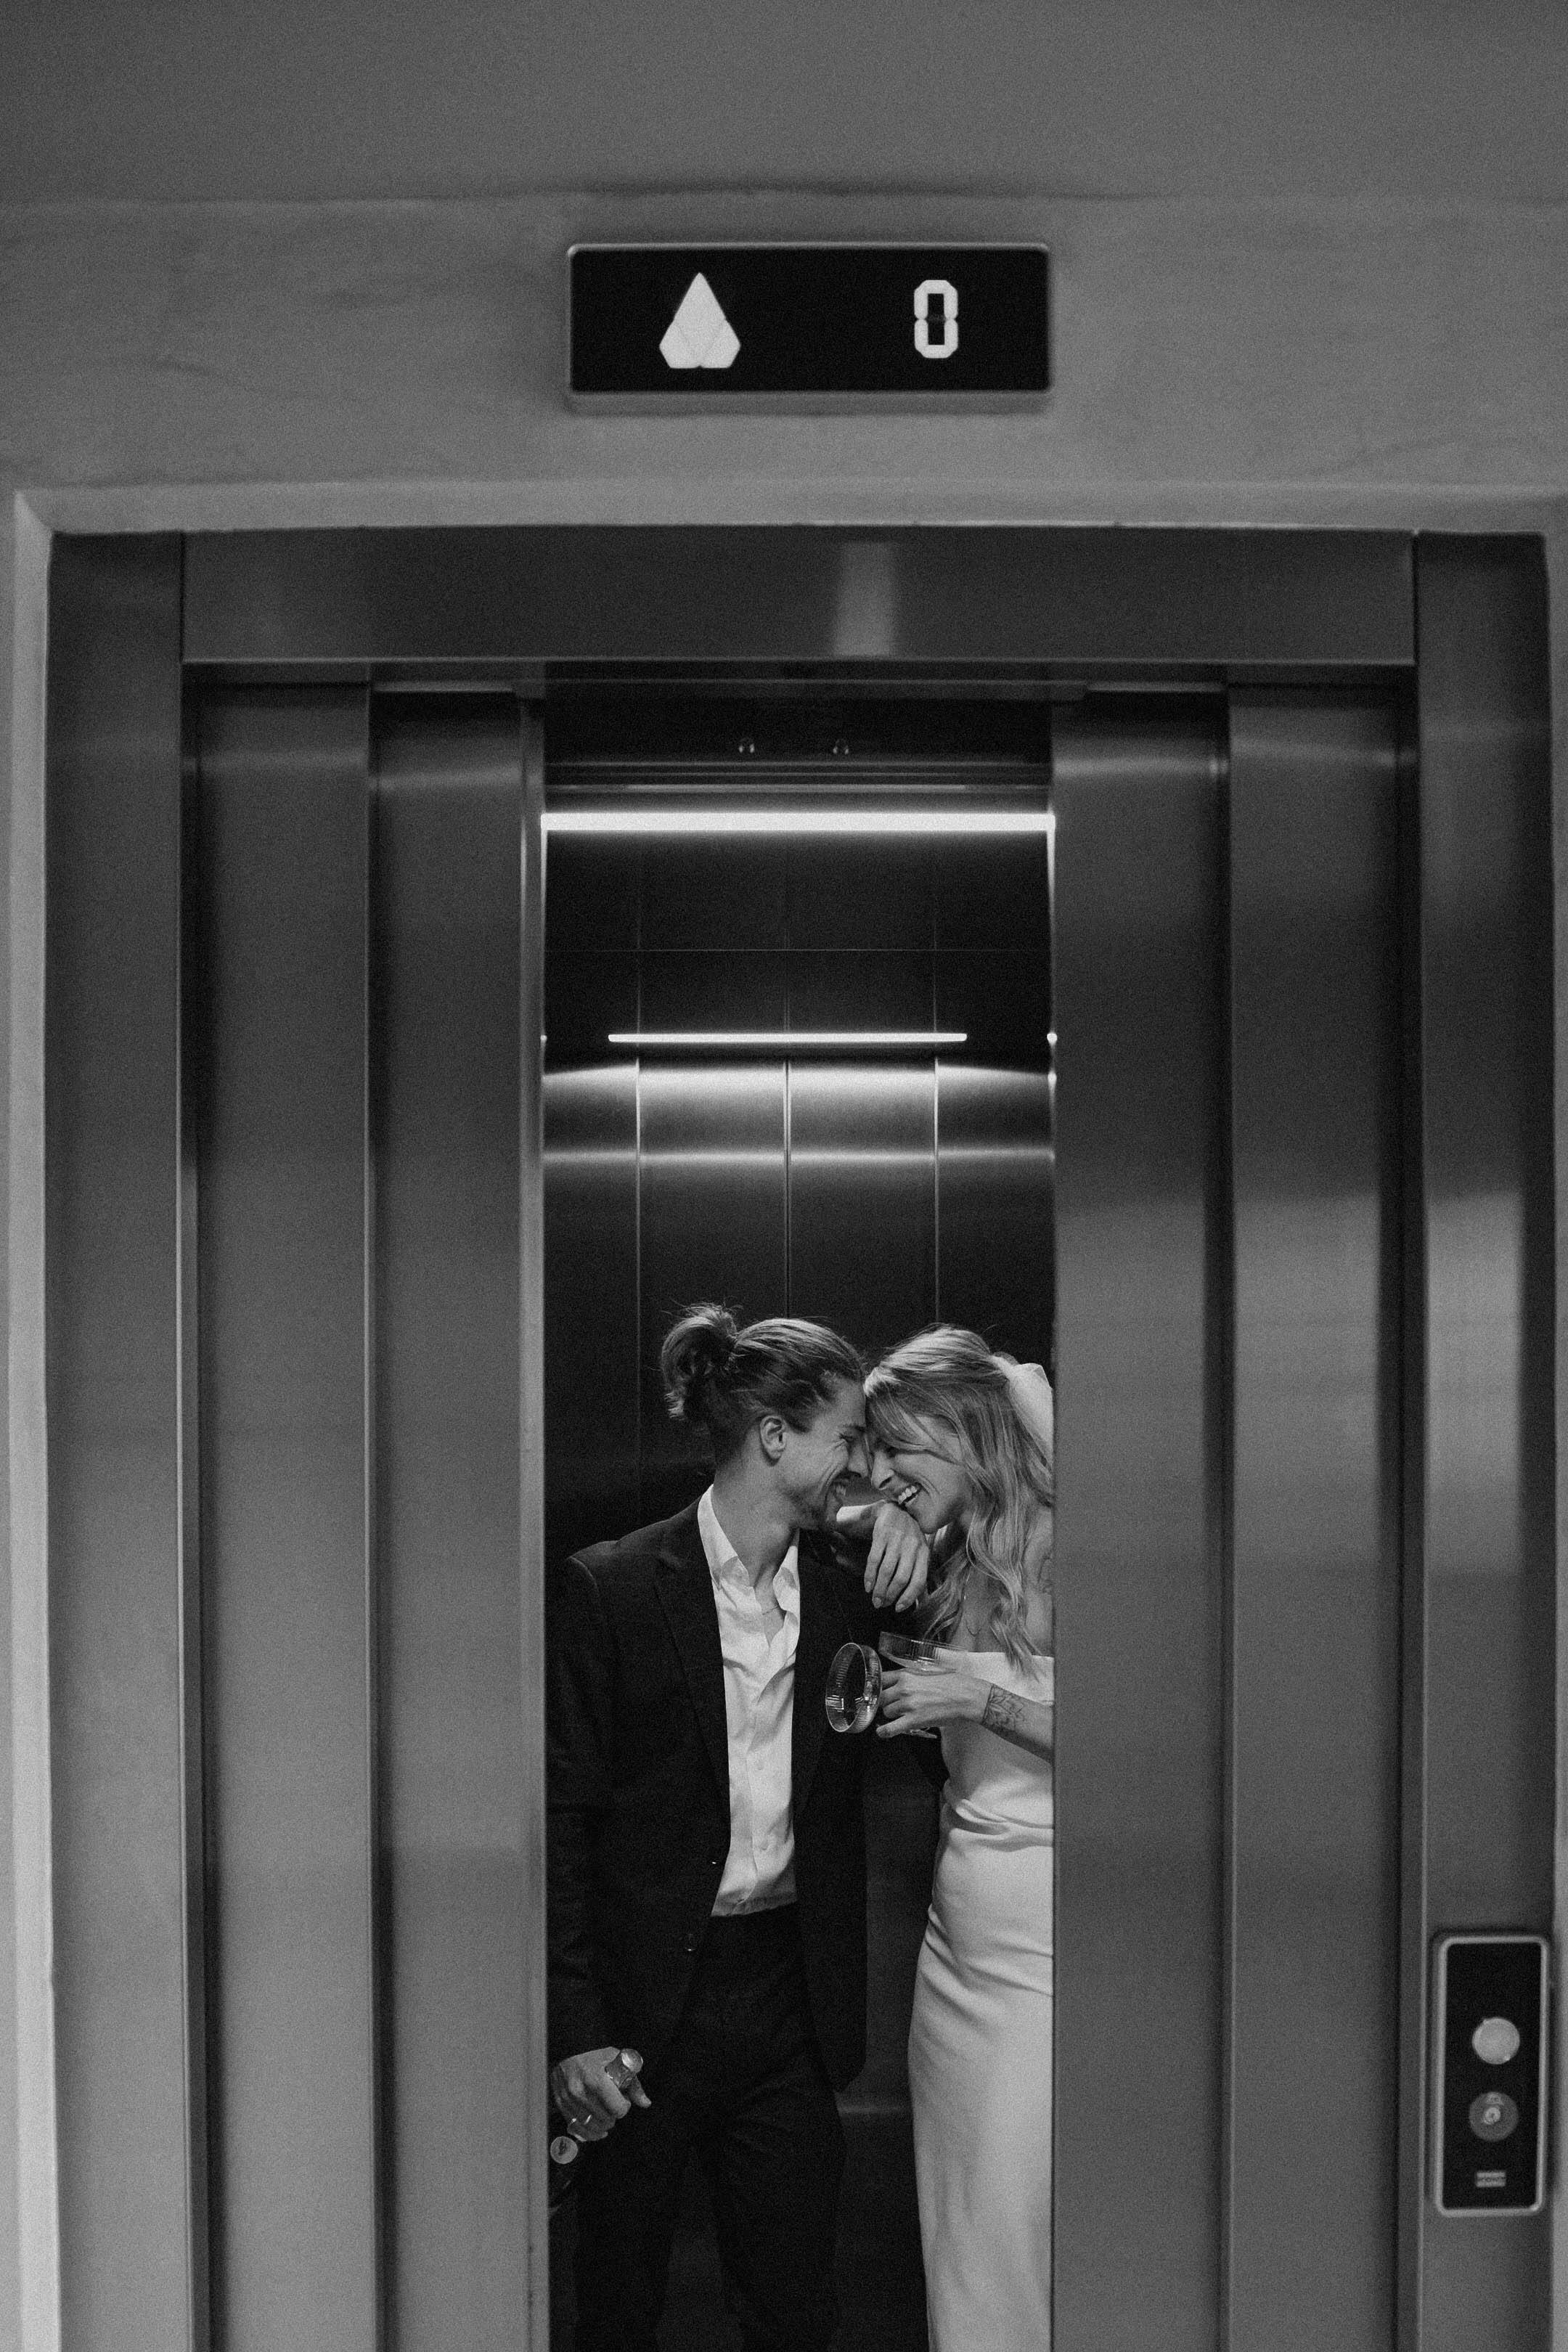 elevator with couple 3